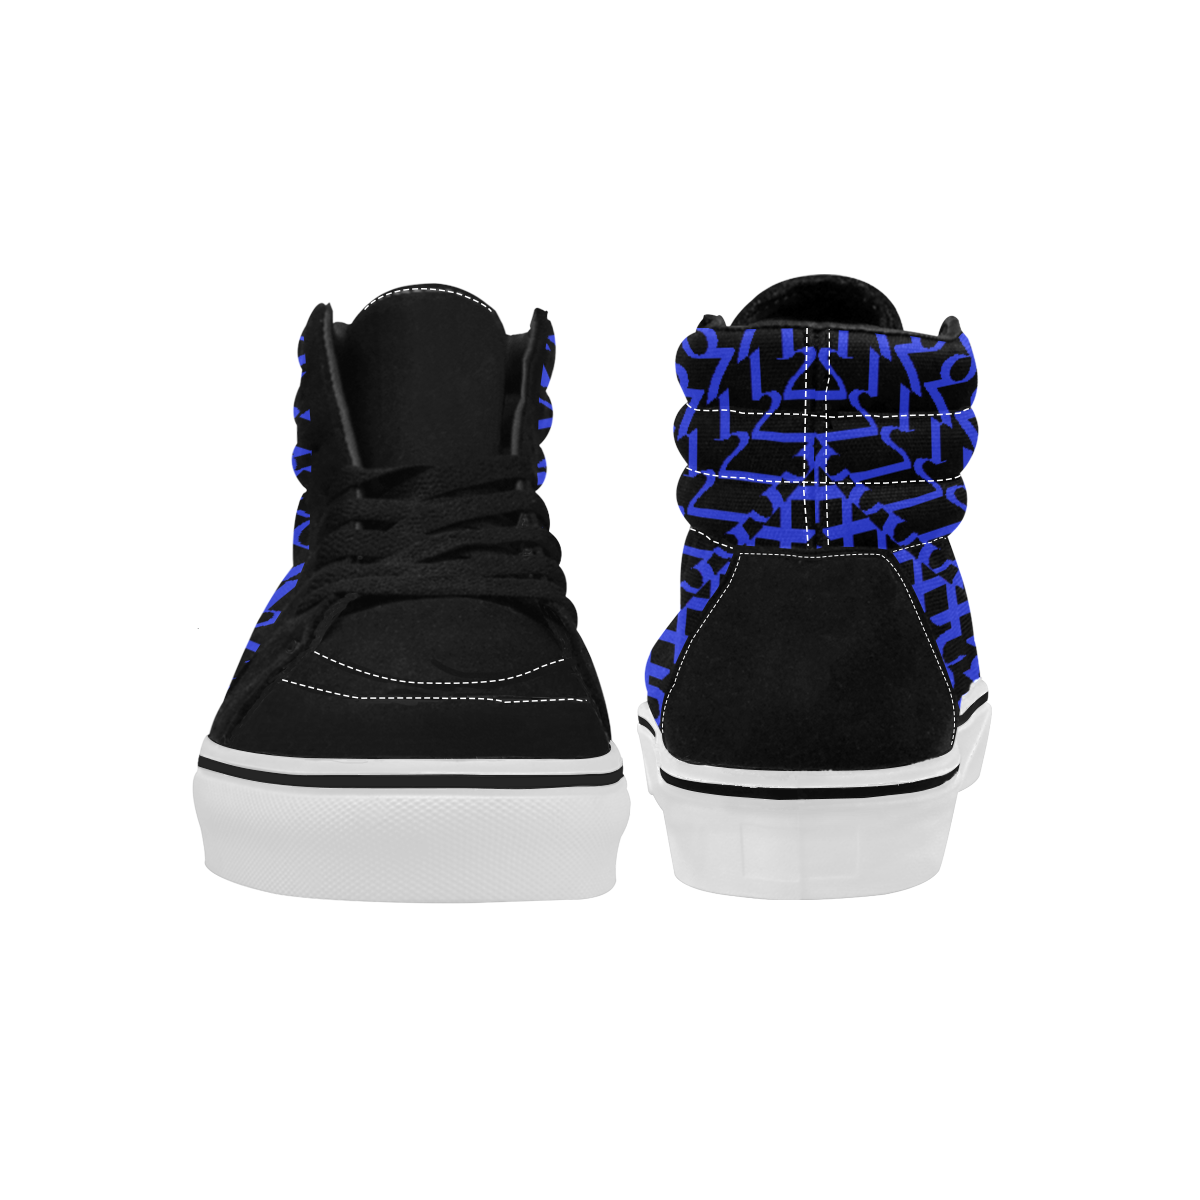 NUMBERS Collection 1234567 Blue/Black Men's High Top Skateboarding Shoes (Model E001-1)